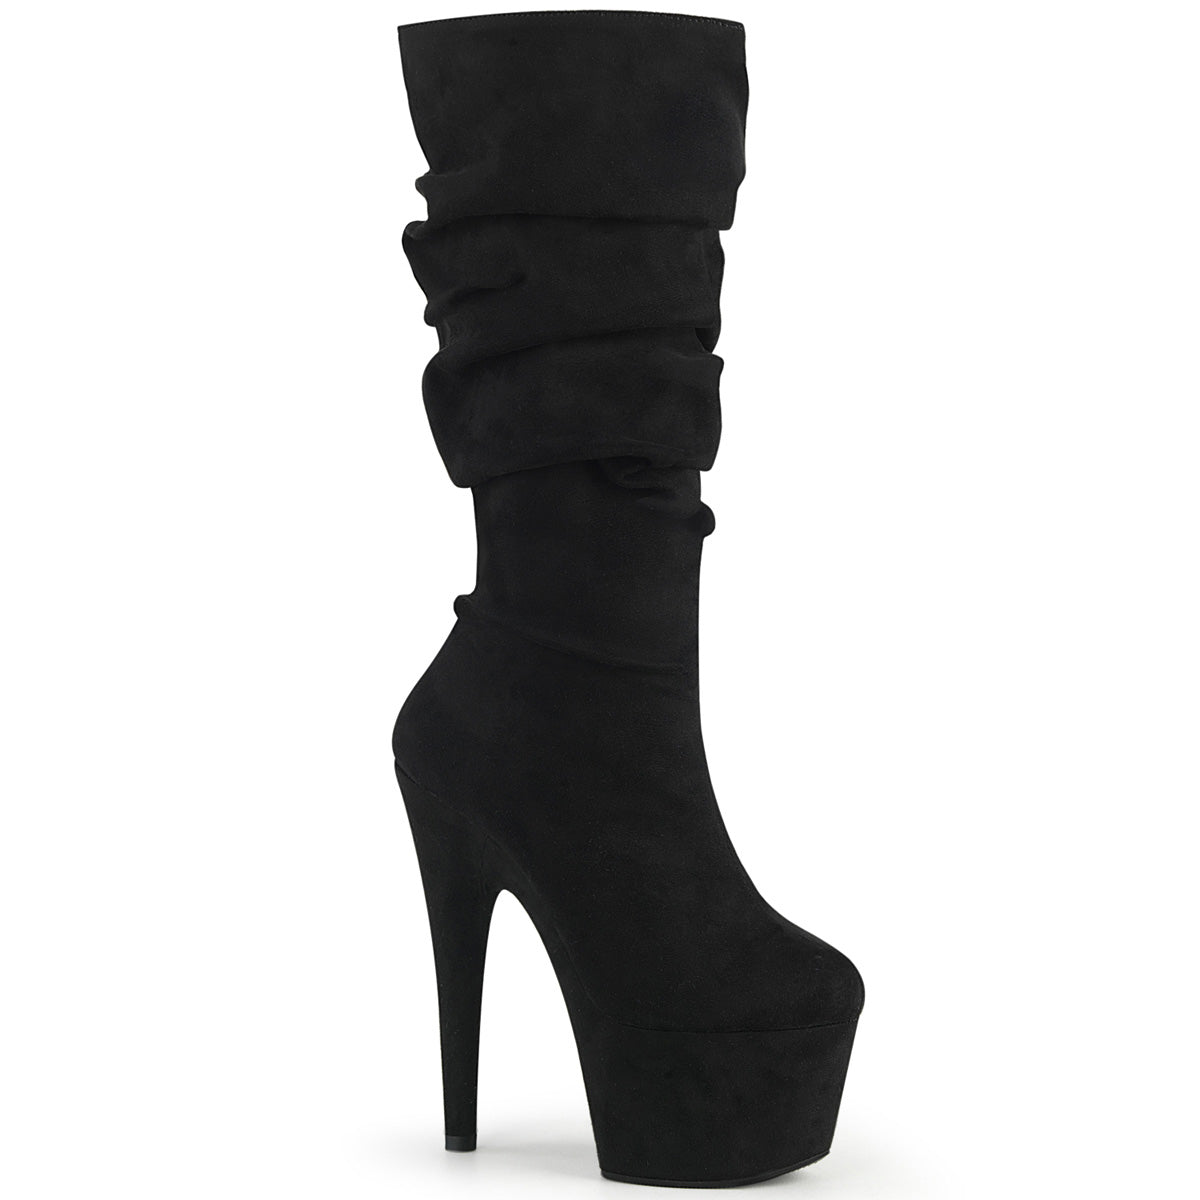 Pleaser ADORE-1061 Black Faux Suede 7 Inch (178mm) Heel, 2 3/4 Inch (70mm) Platform Slouch Mid-Calf Boot Featuring Fully Wrapped Platform Bottom, Inside Zip Closure